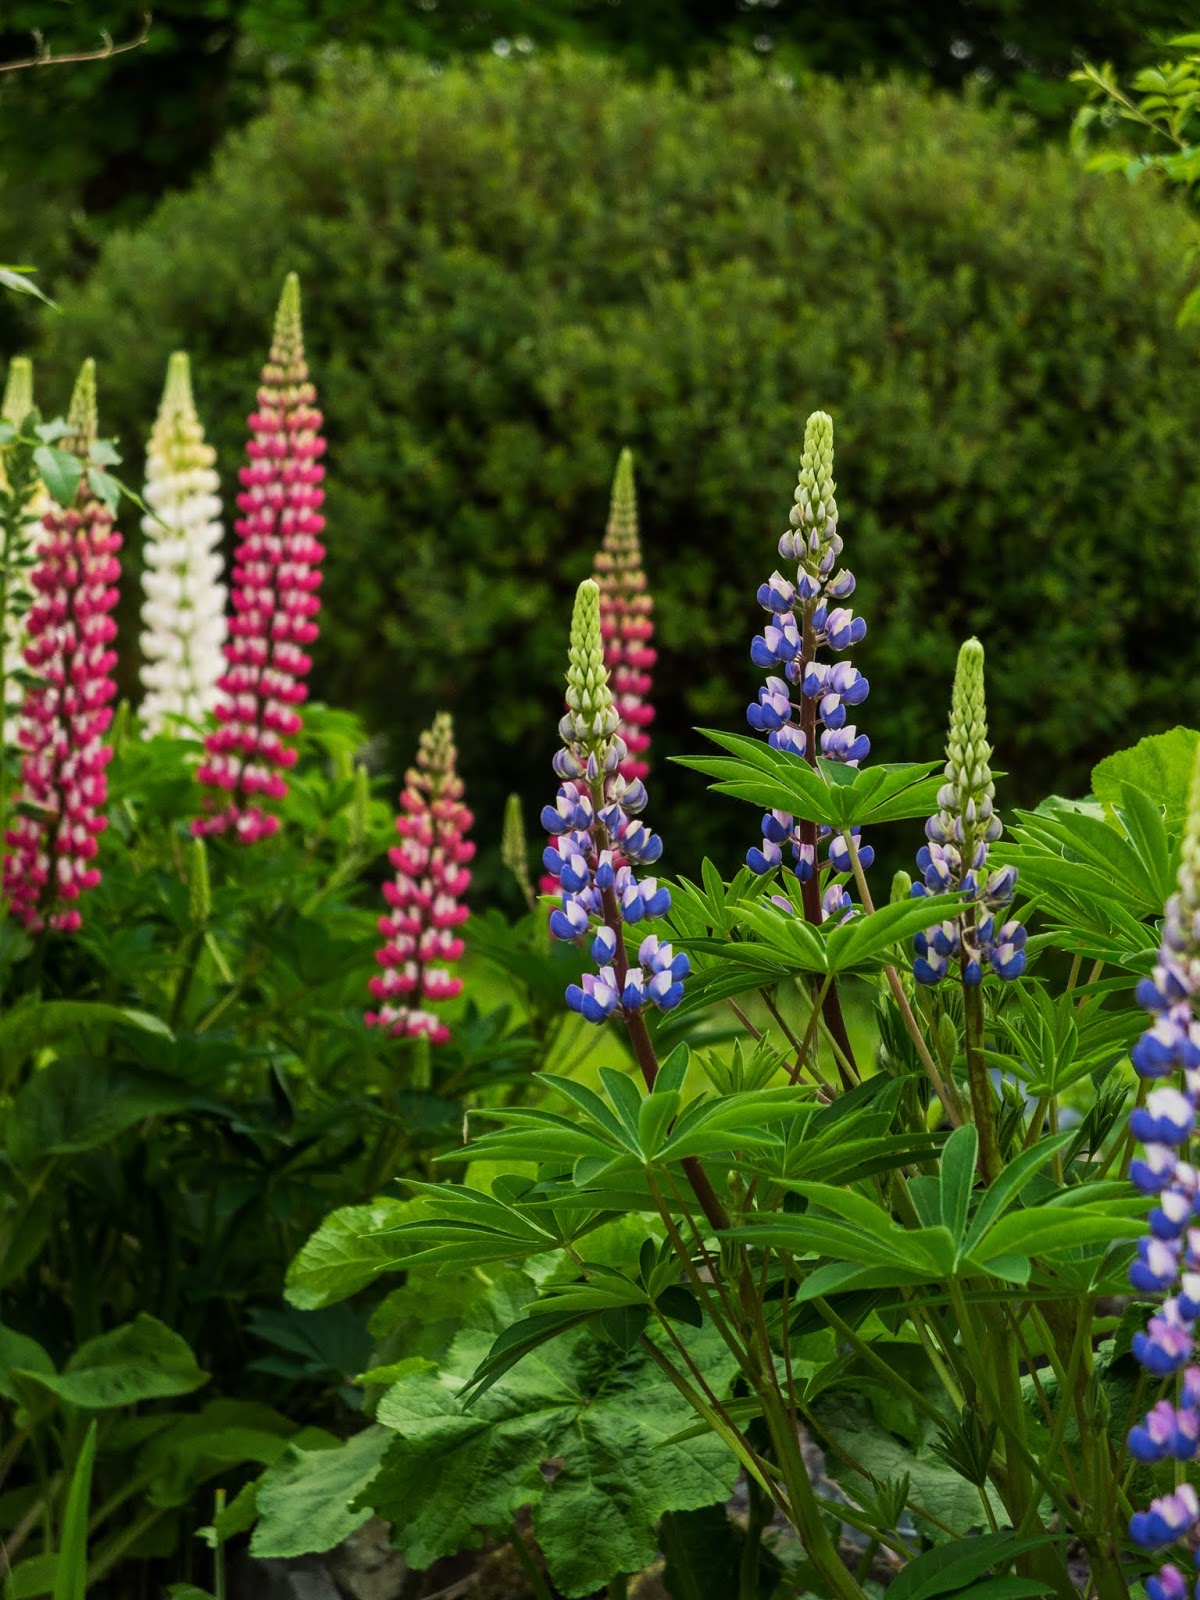 White, pink and blue lupin flowers.